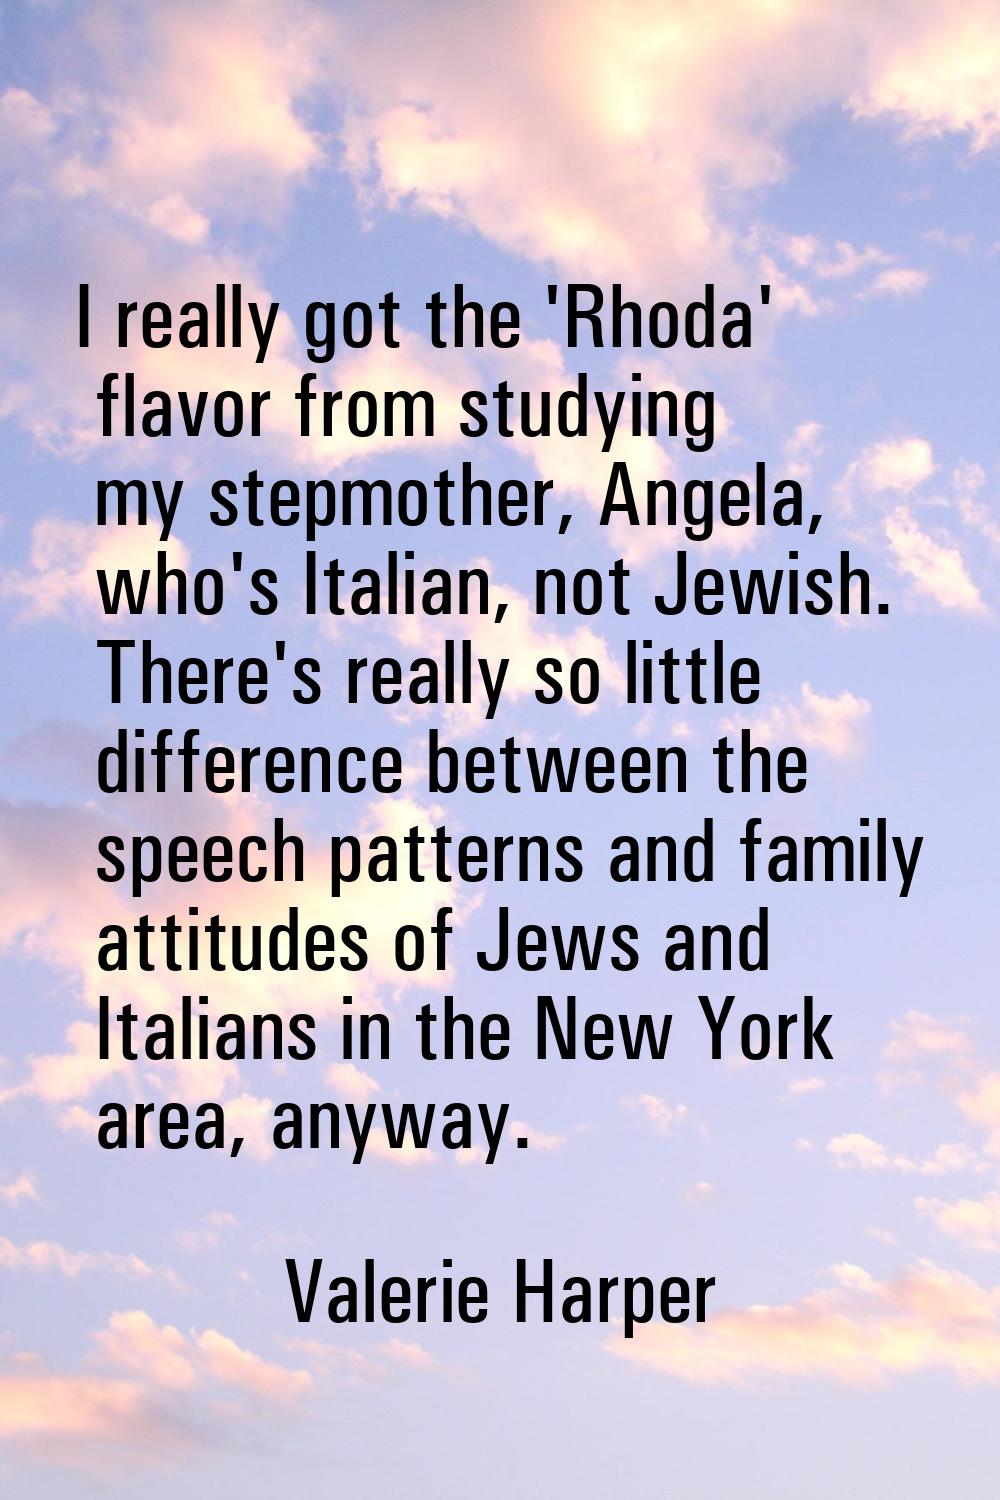 I really got the 'Rhoda' flavor from studying my stepmother, Angela, who's Italian, not Jewish. The